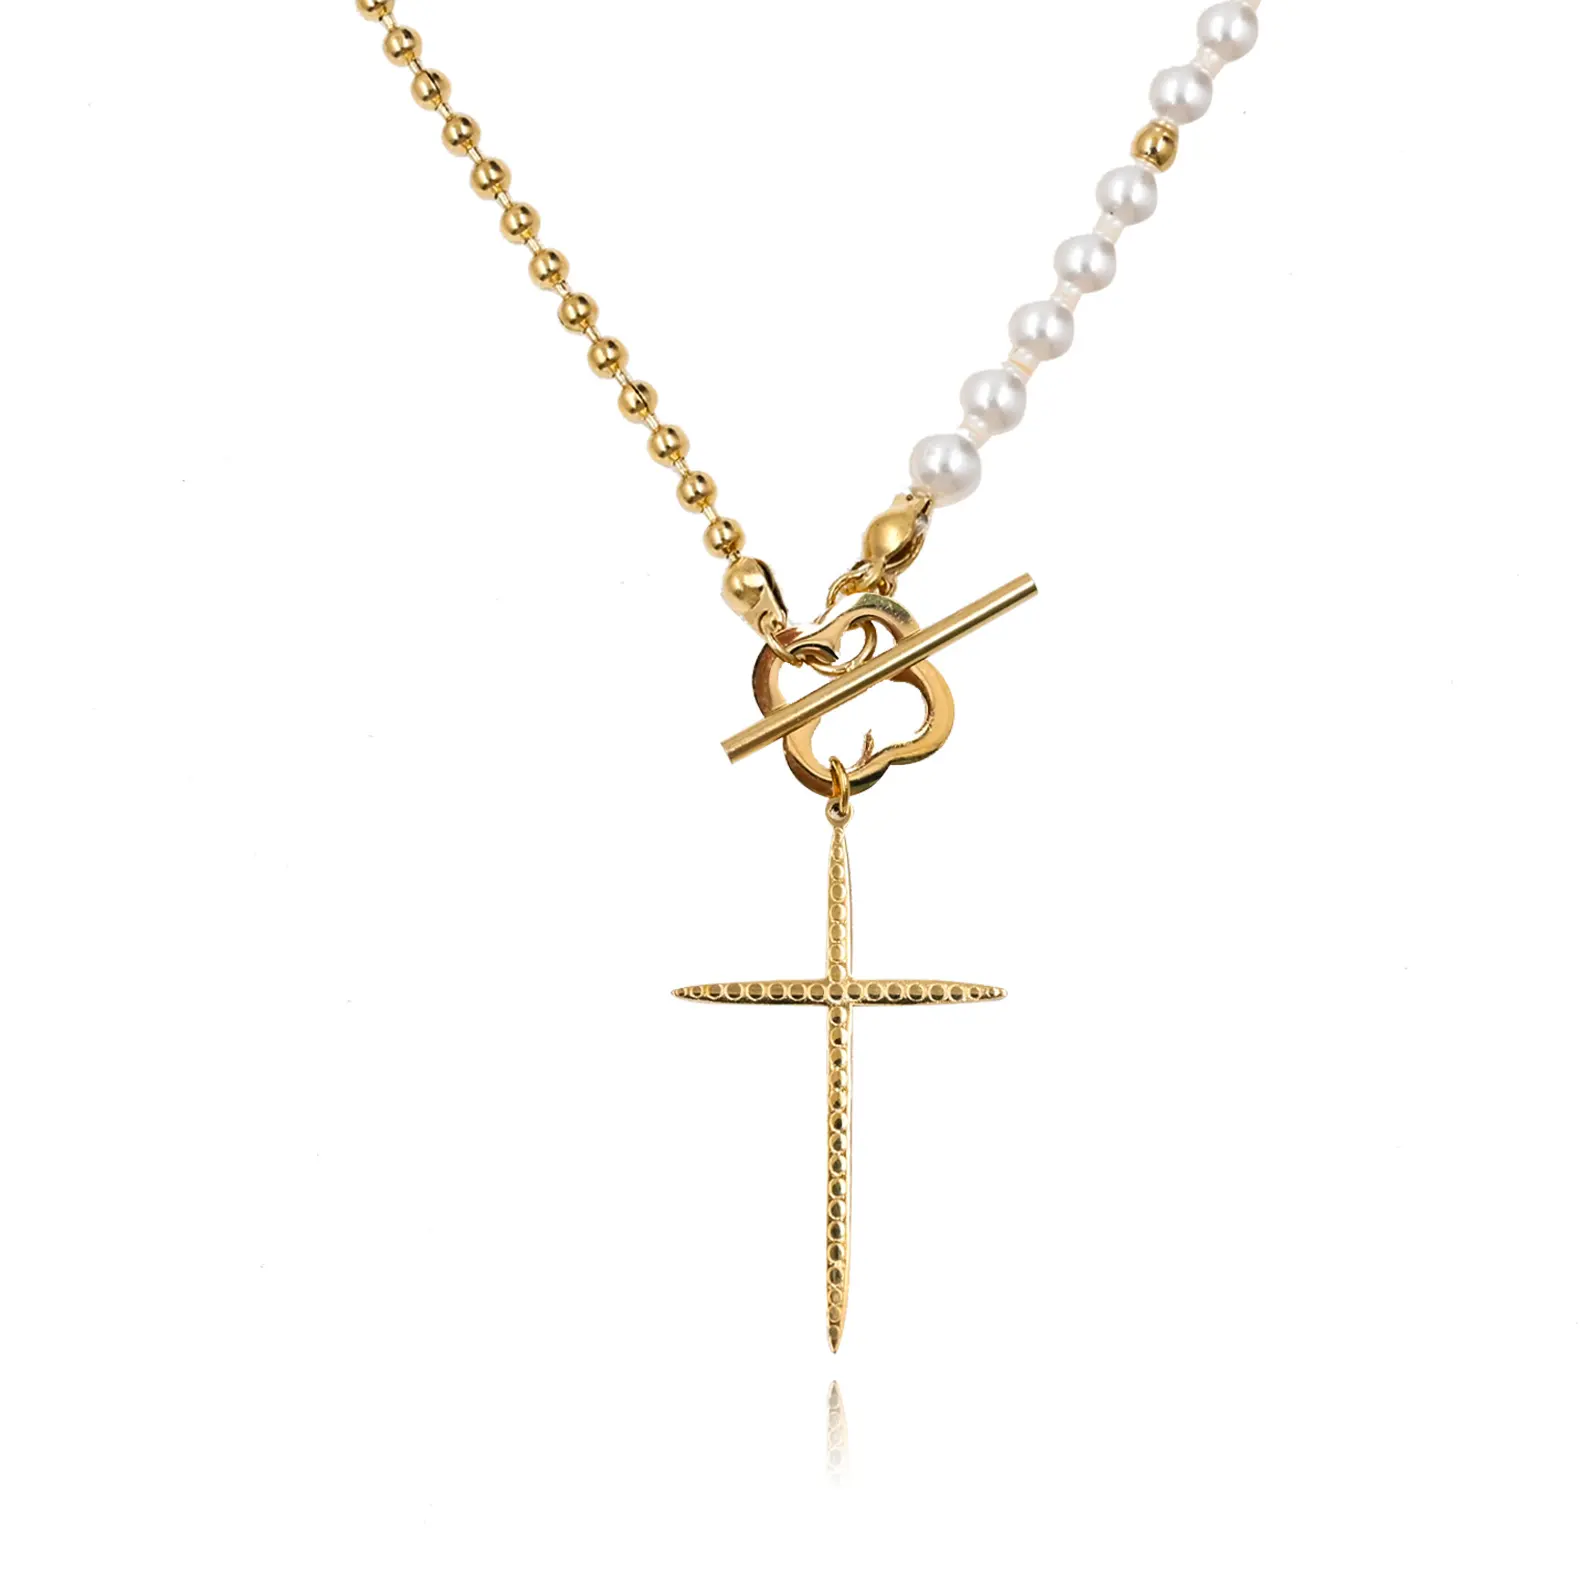 Wholesale Custom Gold Plated Stainless Steel Imitation Pearl Beaded Chain Necklace Cross Pendant Jewelry Necklace Bijoux